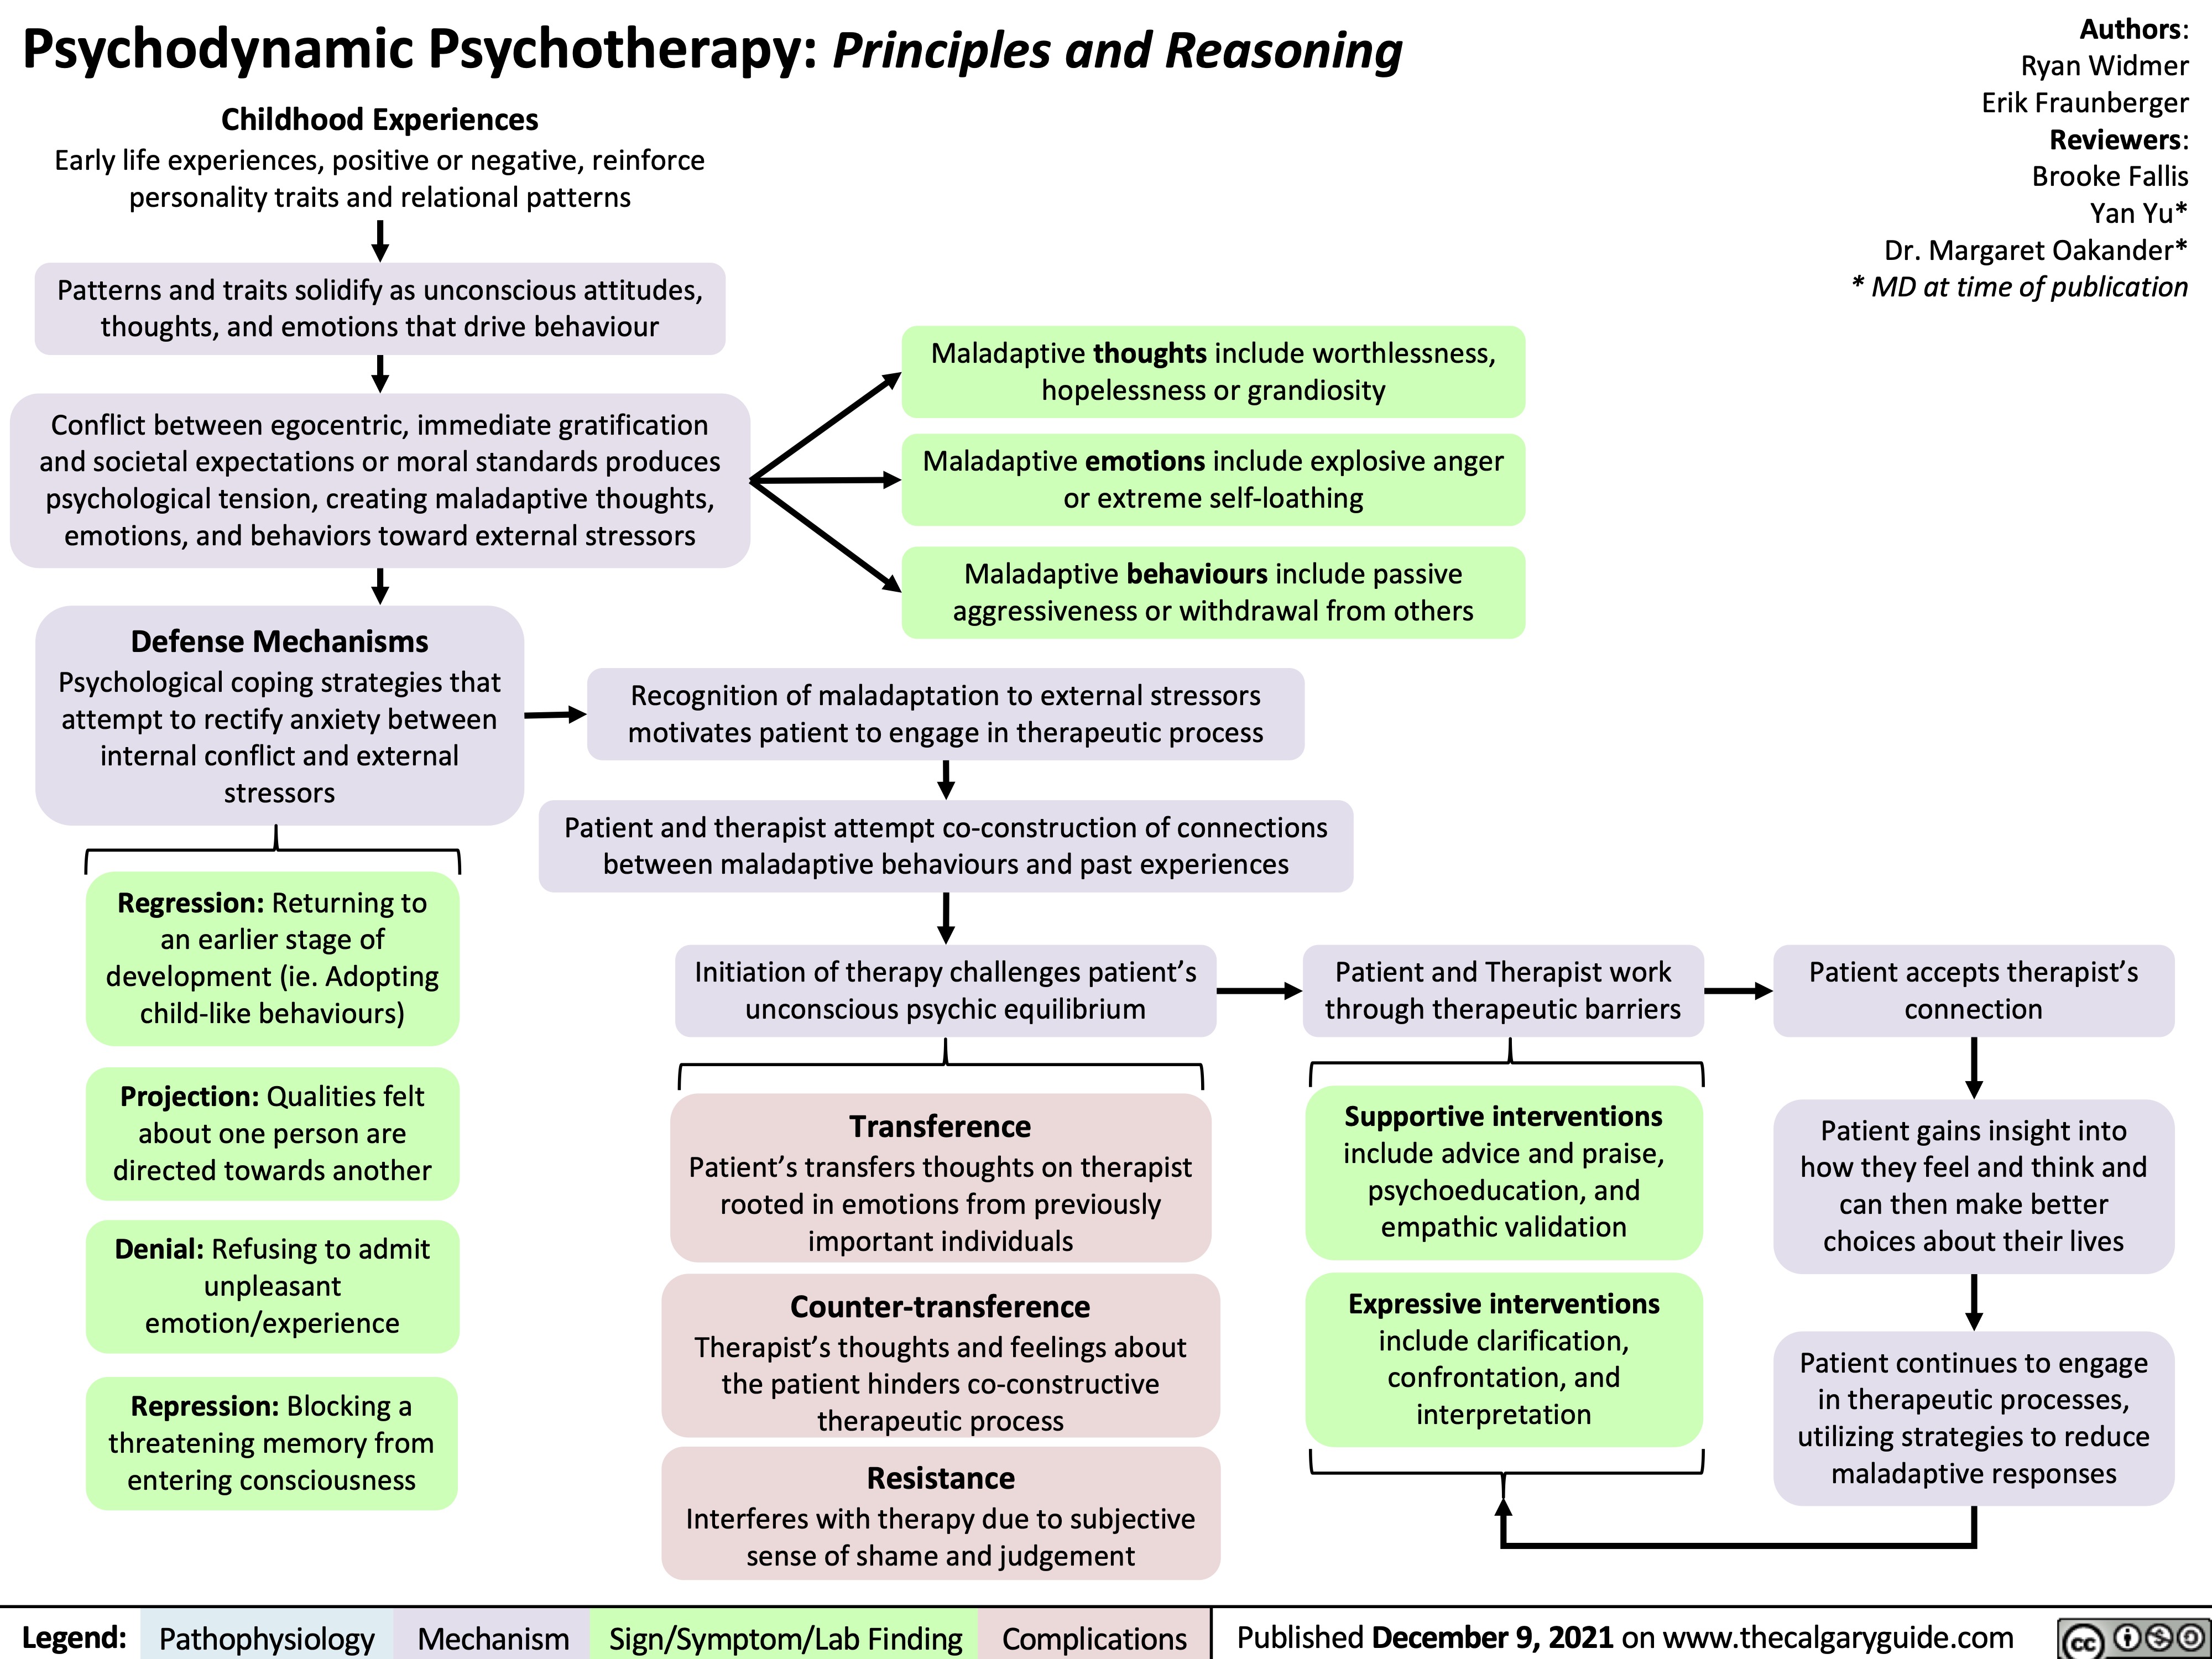 Psychodynamic Psychotherapy: Principles and Reasoning
Authors: Ryan Widmer Erik Fraunberger Reviewers: Brooke Fallis Yan Yu* Dr. Margaret Oakander* * MD at time of publication
 Childhood Experiences
Early life experiences, positive or negative, reinforce personality traits and relational patterns
Patterns and traits solidify as unconscious attitudes, thoughts, and emotions that drive behaviour
Conflict between egocentric, immediate gratification and societal expectations or moral standards produces psychological tension, creating maladaptive thoughts, emotions, and behaviors toward external stressors
Defense Mechanisms
Psychological coping strategies that attempt to rectify anxiety between internal conflict and external stressors
Regression: Returning to an earlier stage of development (ie. Adopting child-like behaviours)
Projection: Qualities felt about one person are directed towards another
Denial: Refusing to admit unpleasant emotion/experience
Repression: Blocking a threatening memory from entering consciousness
  Maladaptive thoughts include worthlessness, hopelessness or grandiosity
Maladaptive emotions include explosive anger or extreme self-loathing
Maladaptive behaviours include passive aggressiveness or withdrawal from others
Recognition of maladaptation to external stressors motivates patient to engage in therapeutic process
Patient and therapist attempt co-construction of connections between maladaptive behaviours and past experiences
             Initiation of therapy challenges patient’s unconscious psychic equilibrium
Transference
Patient’s transfers thoughts on therapist rooted in emotions from previously important individuals
Counter-transference
Therapist’s thoughts and feelings about the patient hinders co-constructive therapeutic process
Resistance
Interferes with therapy due to subjective sense of shame and judgement
Patient and Therapist work through therapeutic barriers
Supportive interventions
include advice and praise, psychoeducation, and empathic validation
Expressive interventions
include clarification, confrontation, and interpretation
Patient accepts therapist’s connection
Patient gains insight into how they feel and think and can then make better choices about their lives
Patient continues to engage in therapeutic processes, utilizing strategies to reduce maladaptive responses
             Legend:
 Pathophysiology
Mechanism
Sign/Symptom/Lab Finding
 Complications
Published December 9, 2021 on www.thecalgaryguide.com
    